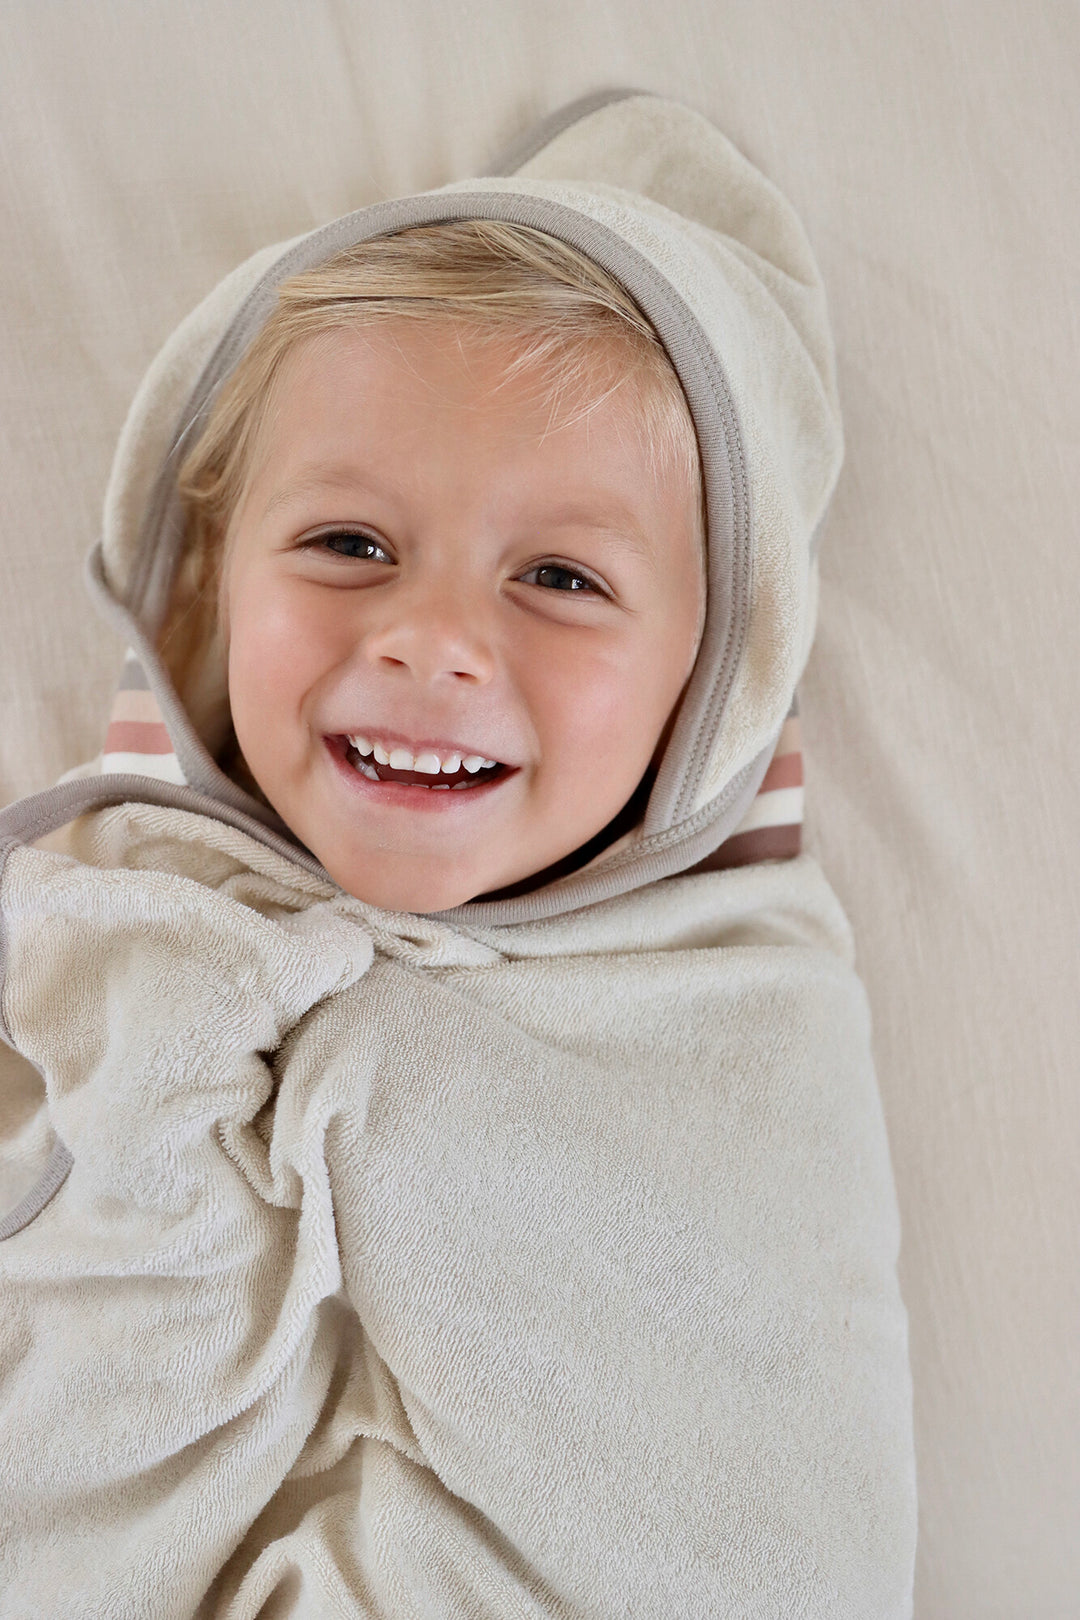 Child wearing Organic Terry Cloth Hooded Towel in Neutrals.